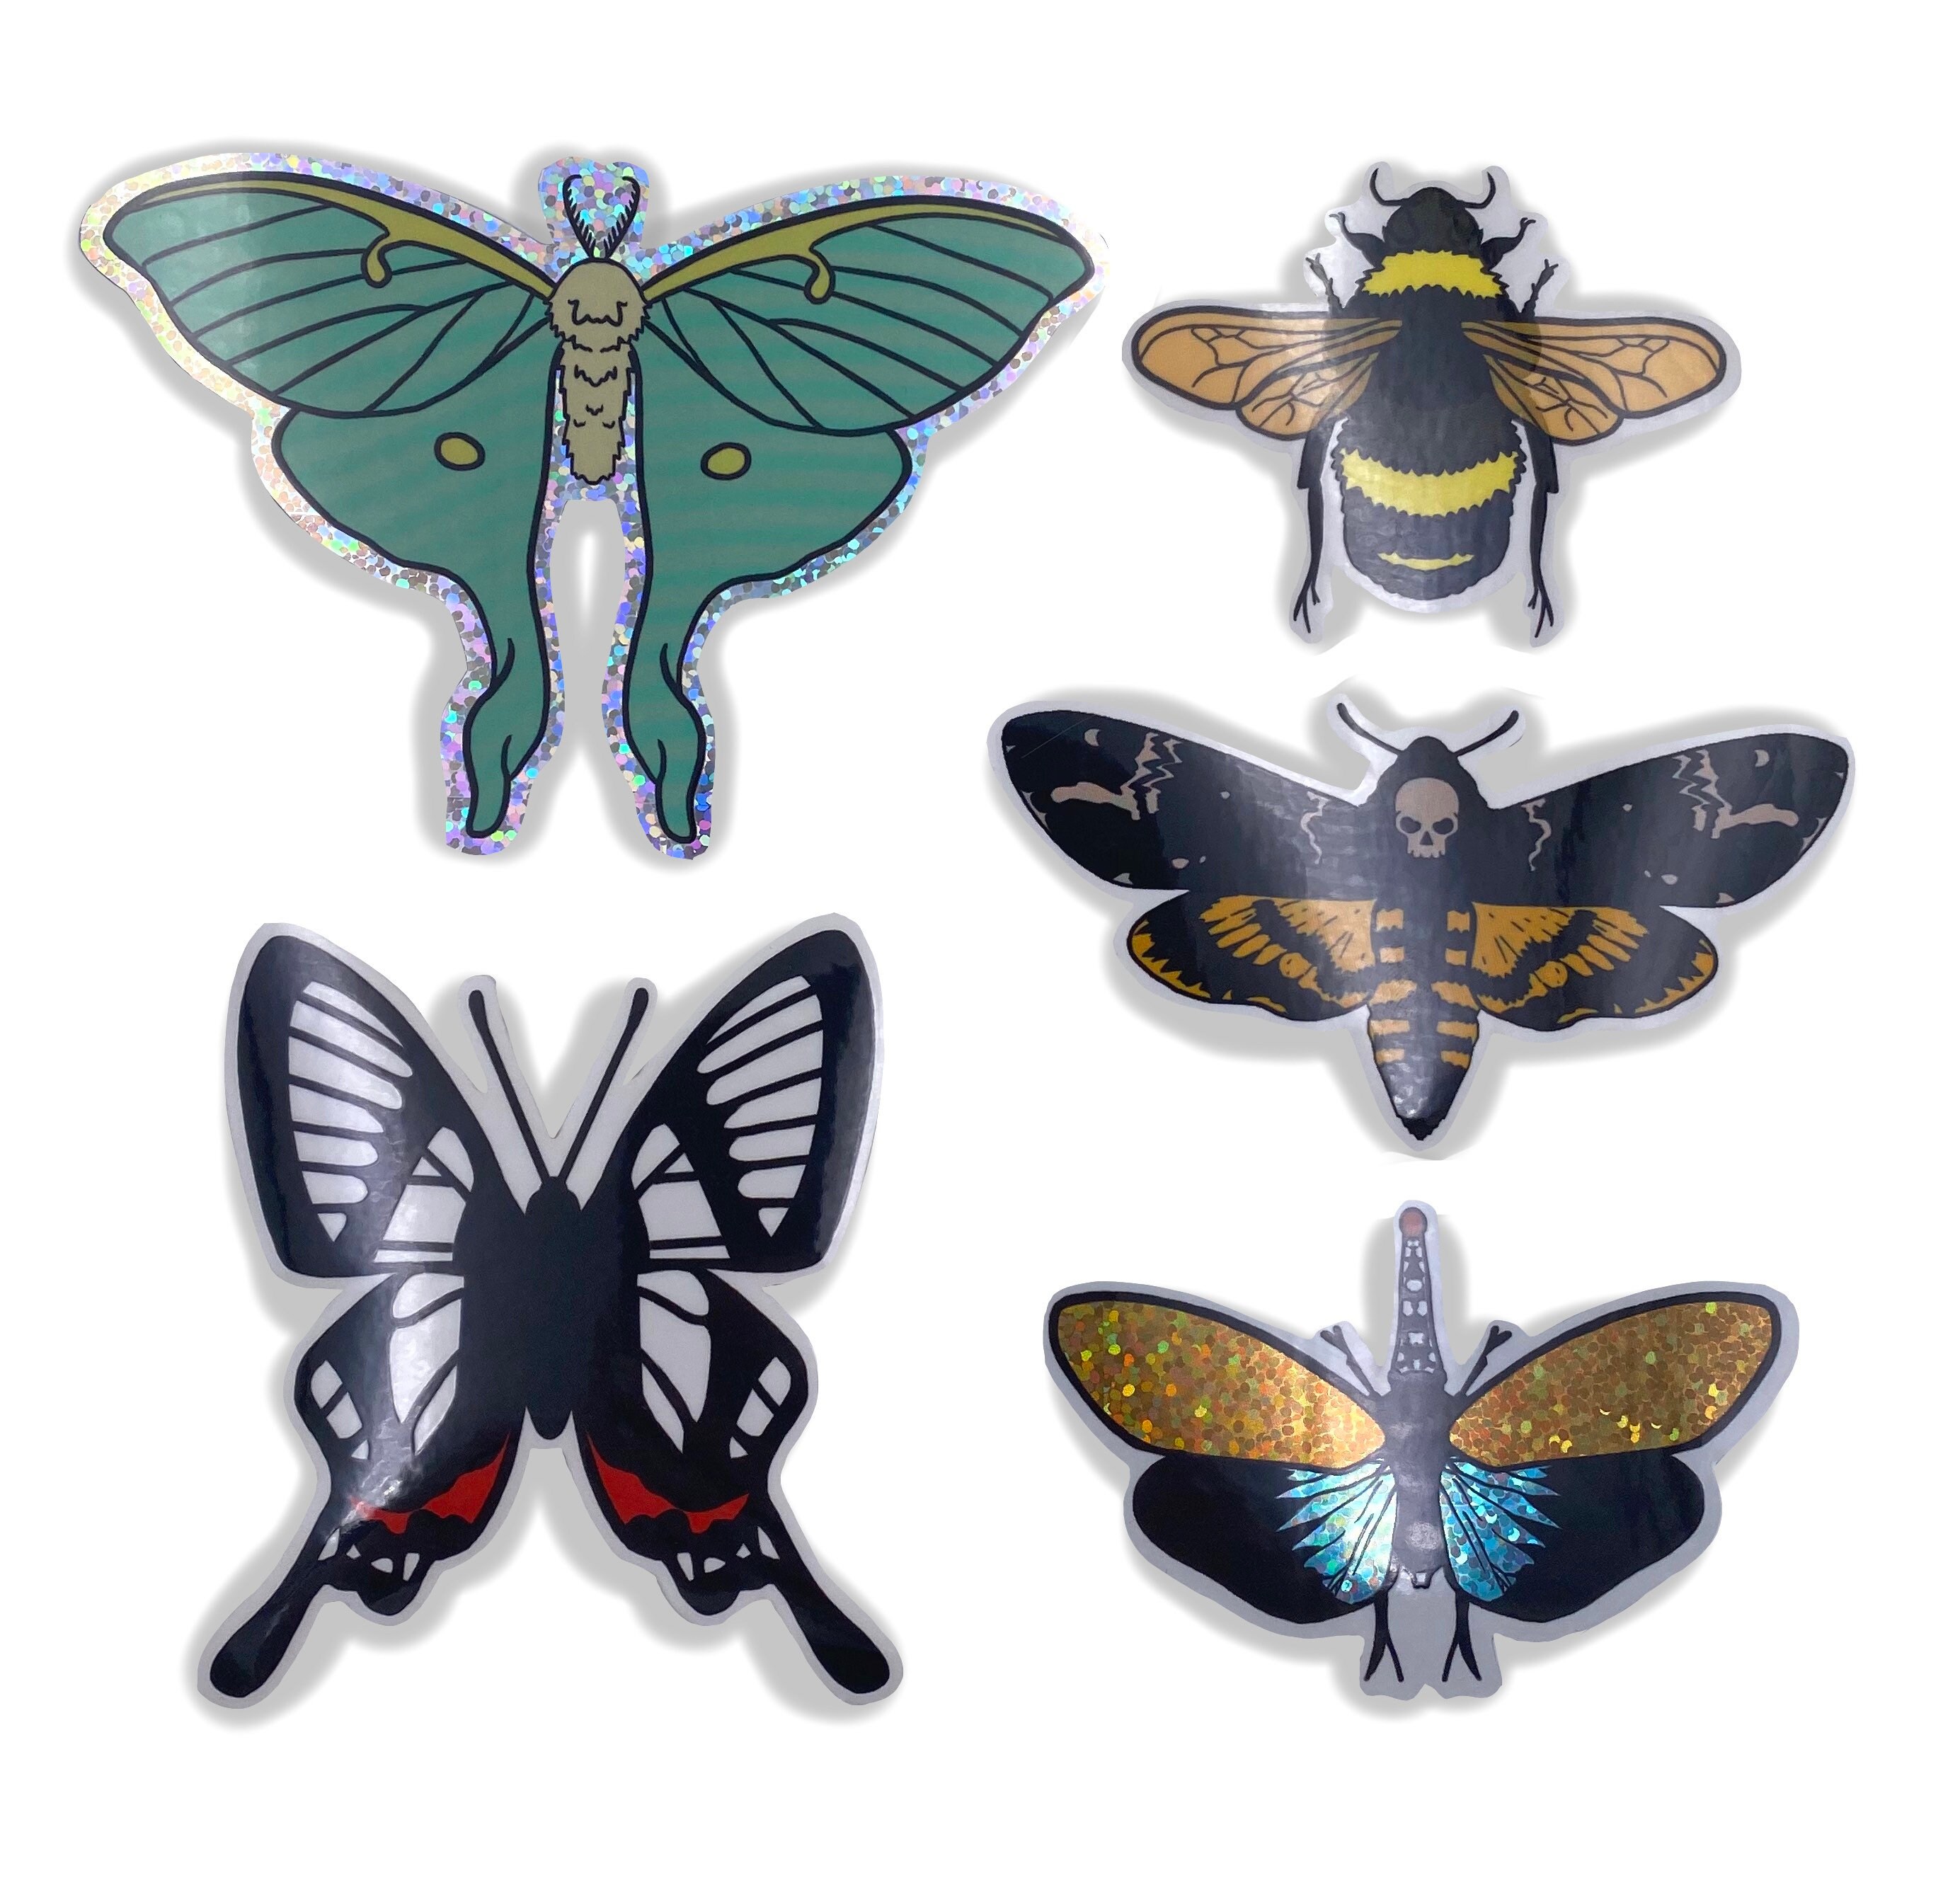 Buggy friend sticker set #1 - comes with 5 LARGE holographic or glitter ...